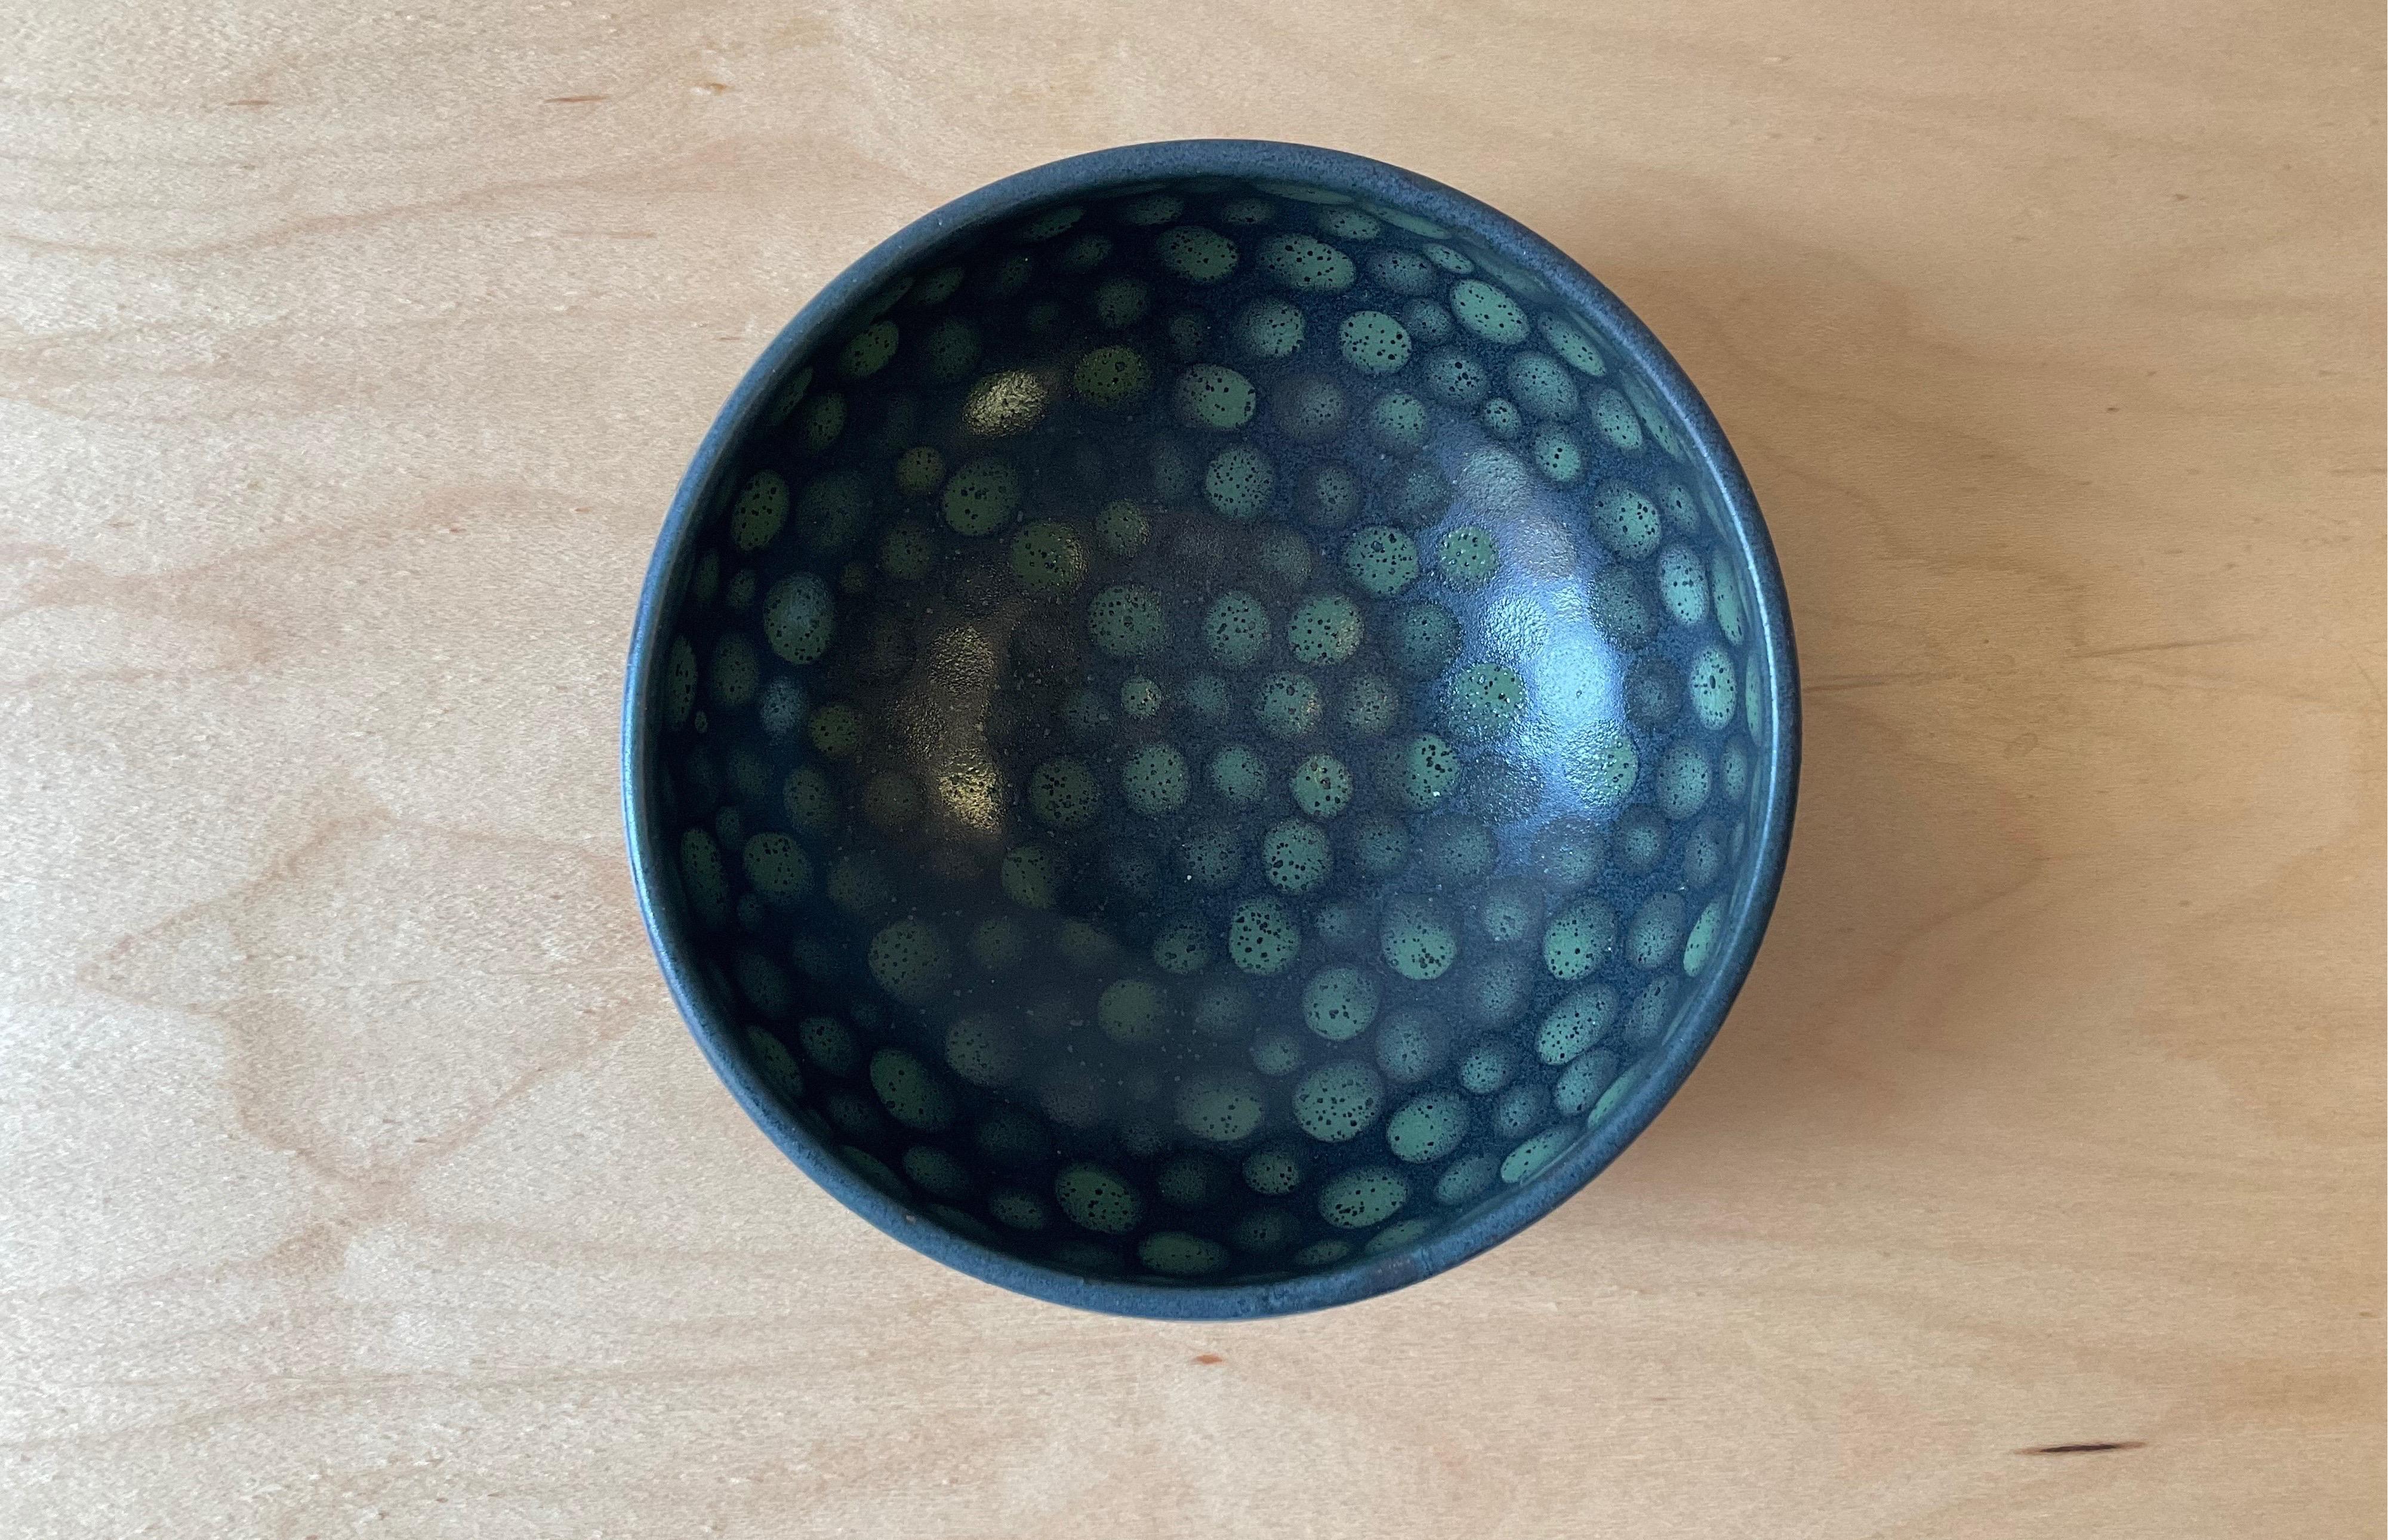 Small hand-thrown stoneware bowl. Green dots on black glaze. Measures: 4.5” x 4.5” x 2.5”

Made in Tribeca, NYC, by artist Lana Kova.